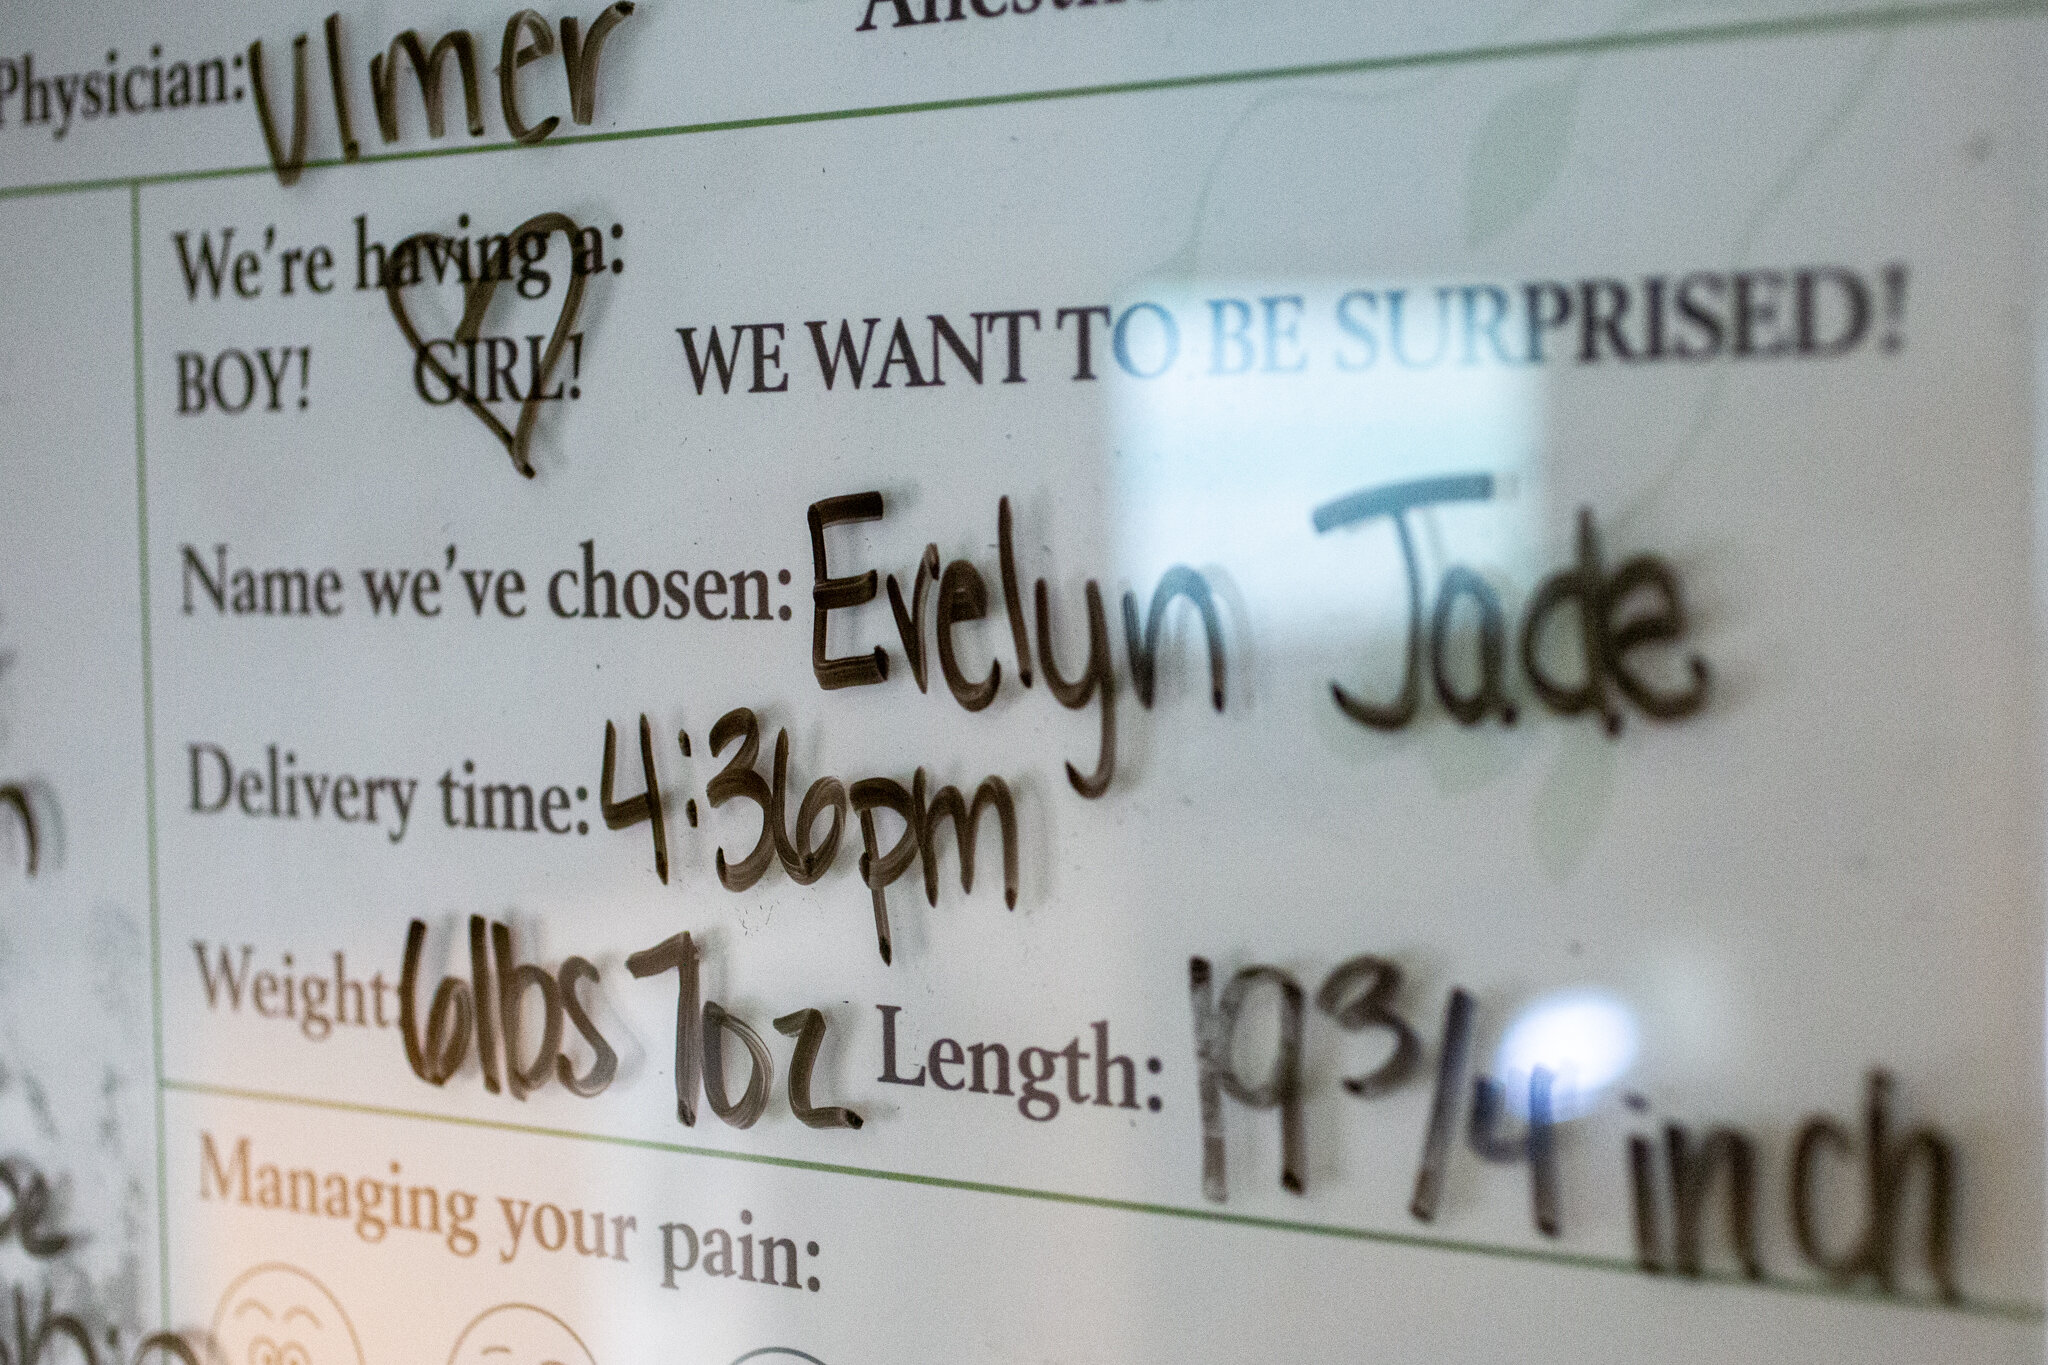 Hospital board reading "Evelyn Jade" and baby's birth details